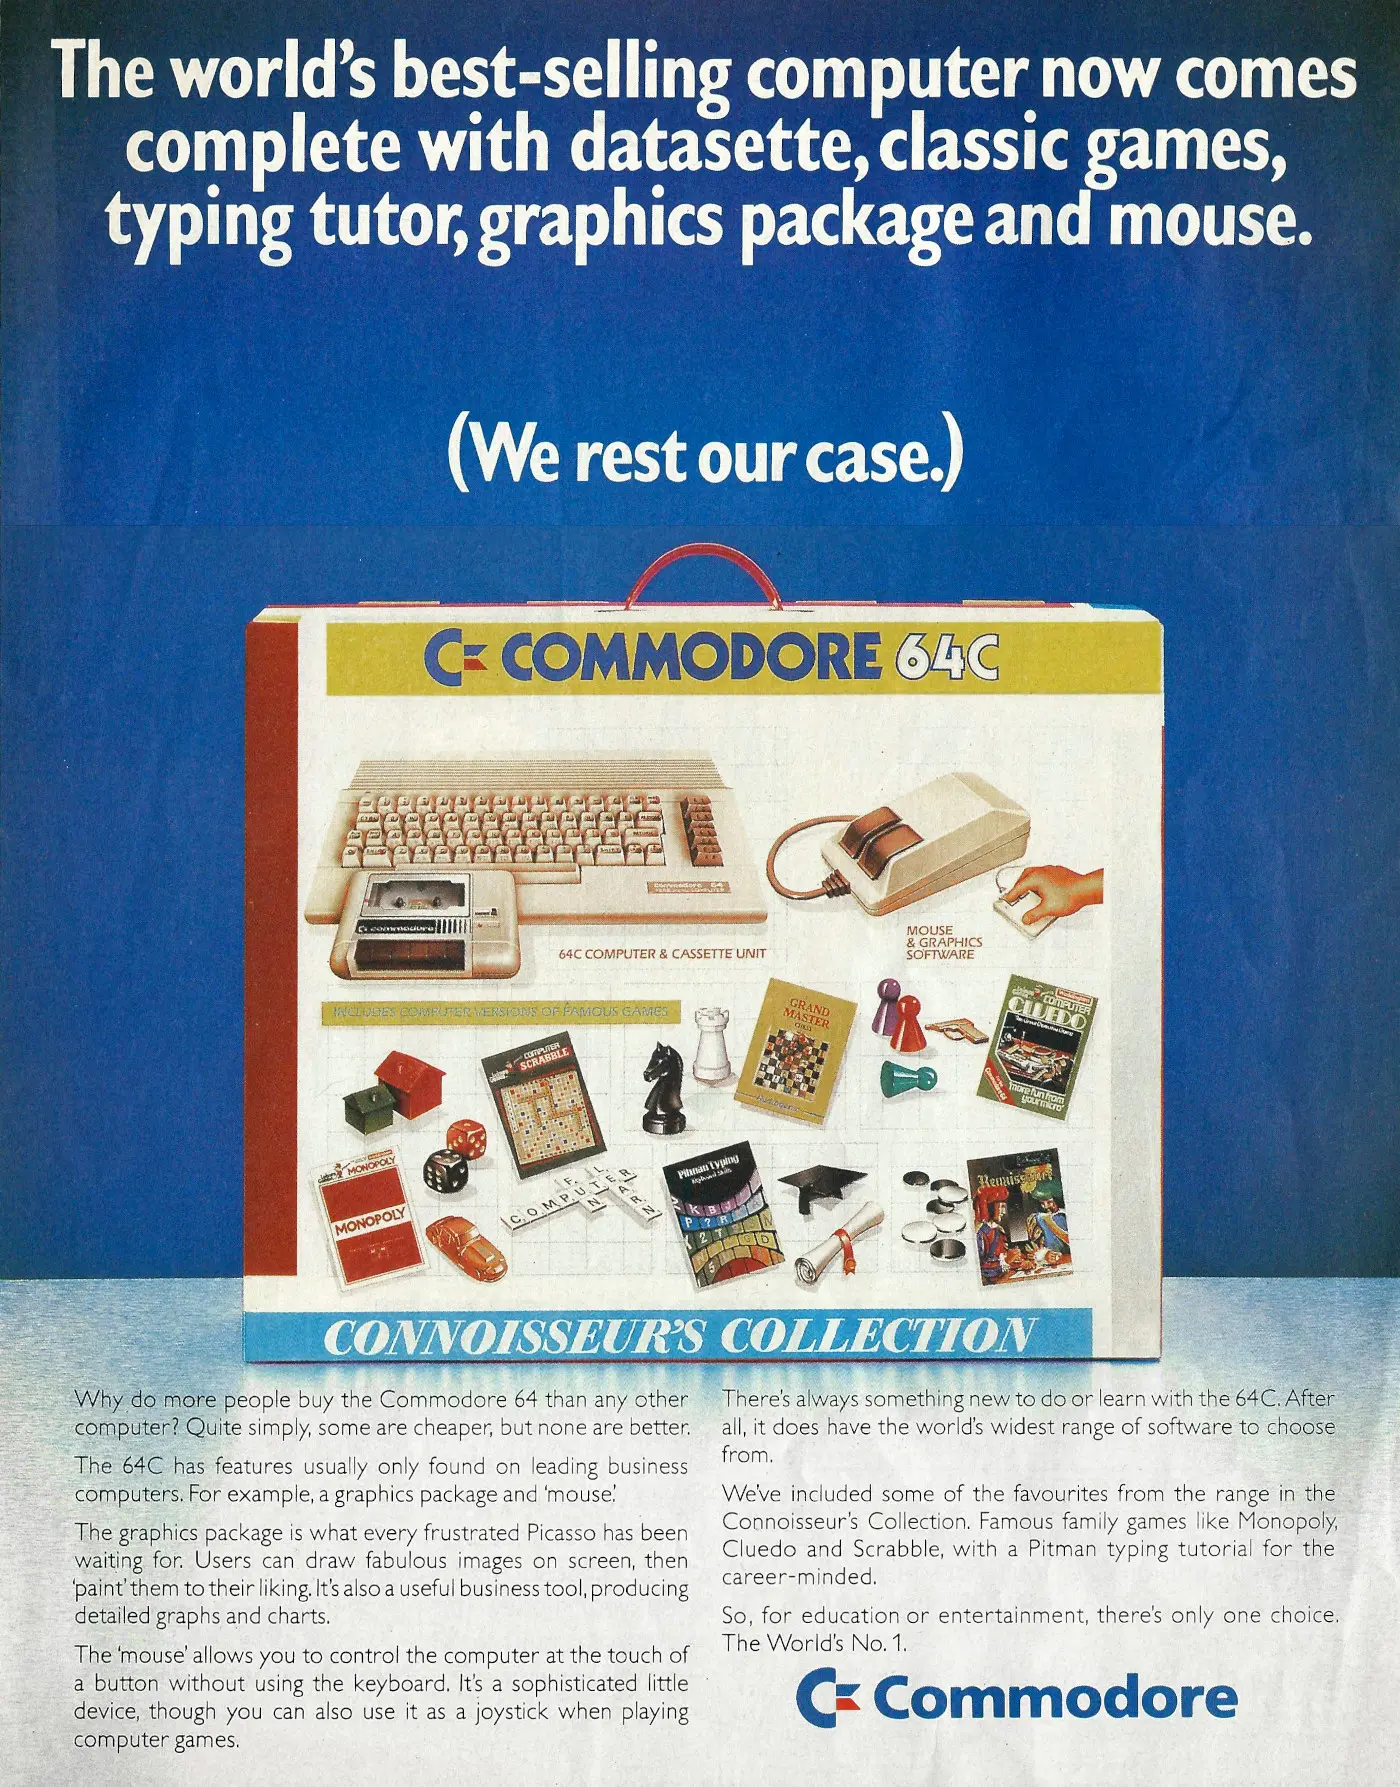 Commodore Advert: Commodore 64: The World's Best-Selling Computer Now Comes ... With a Mouse, from Sunday Times, June 1986